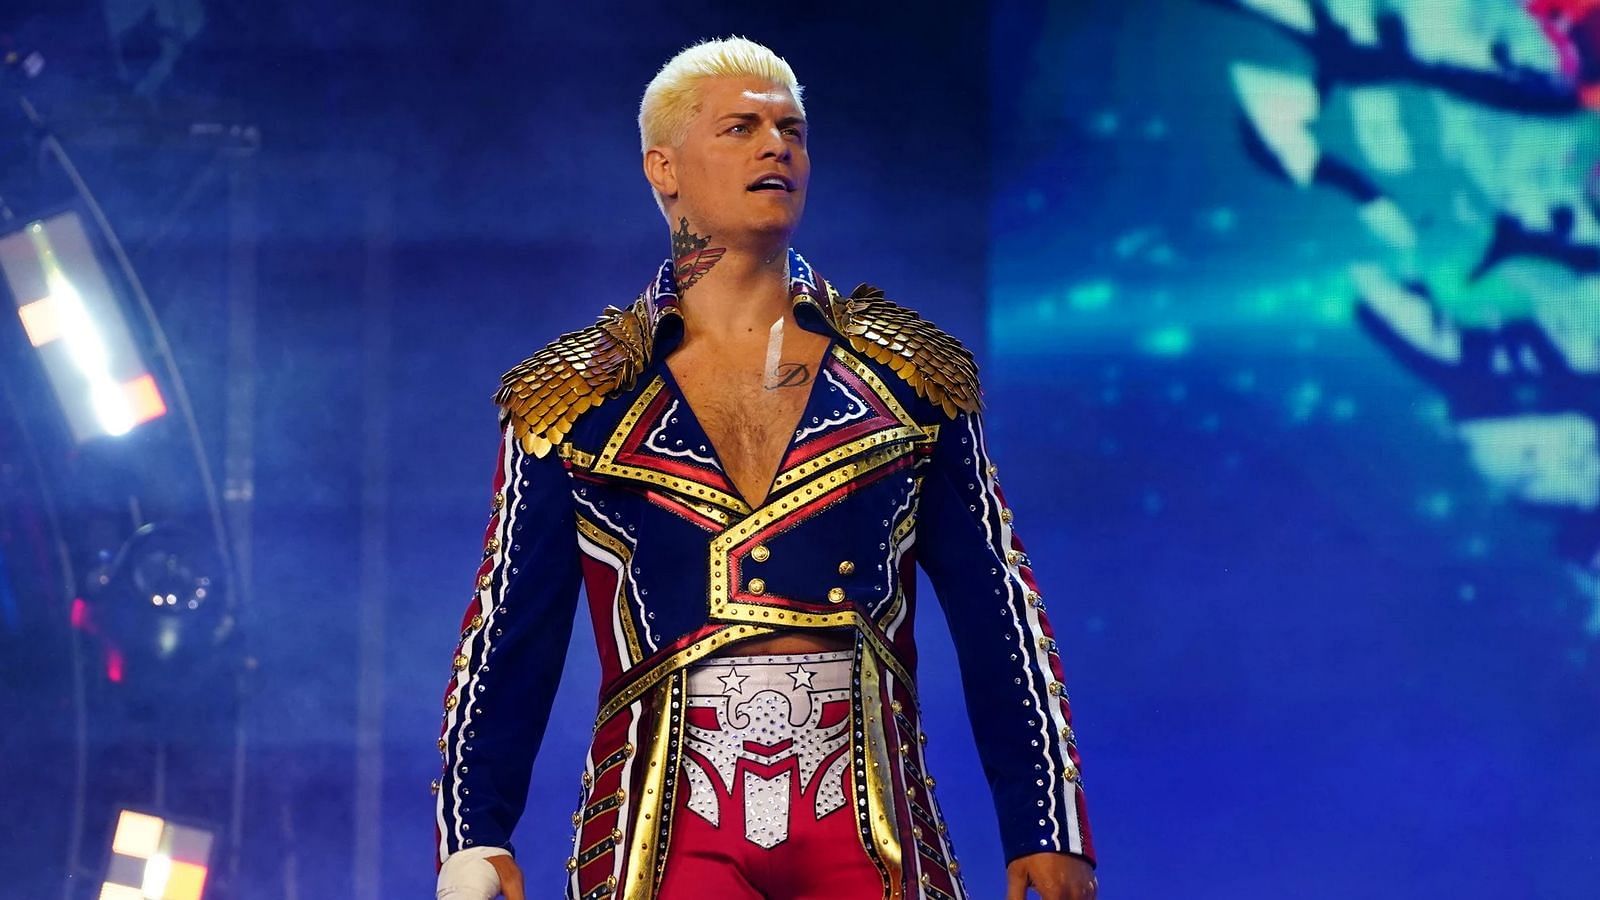 Cody Rhodes wearing his &quot;Homelander&quot; inspired entrance attire.